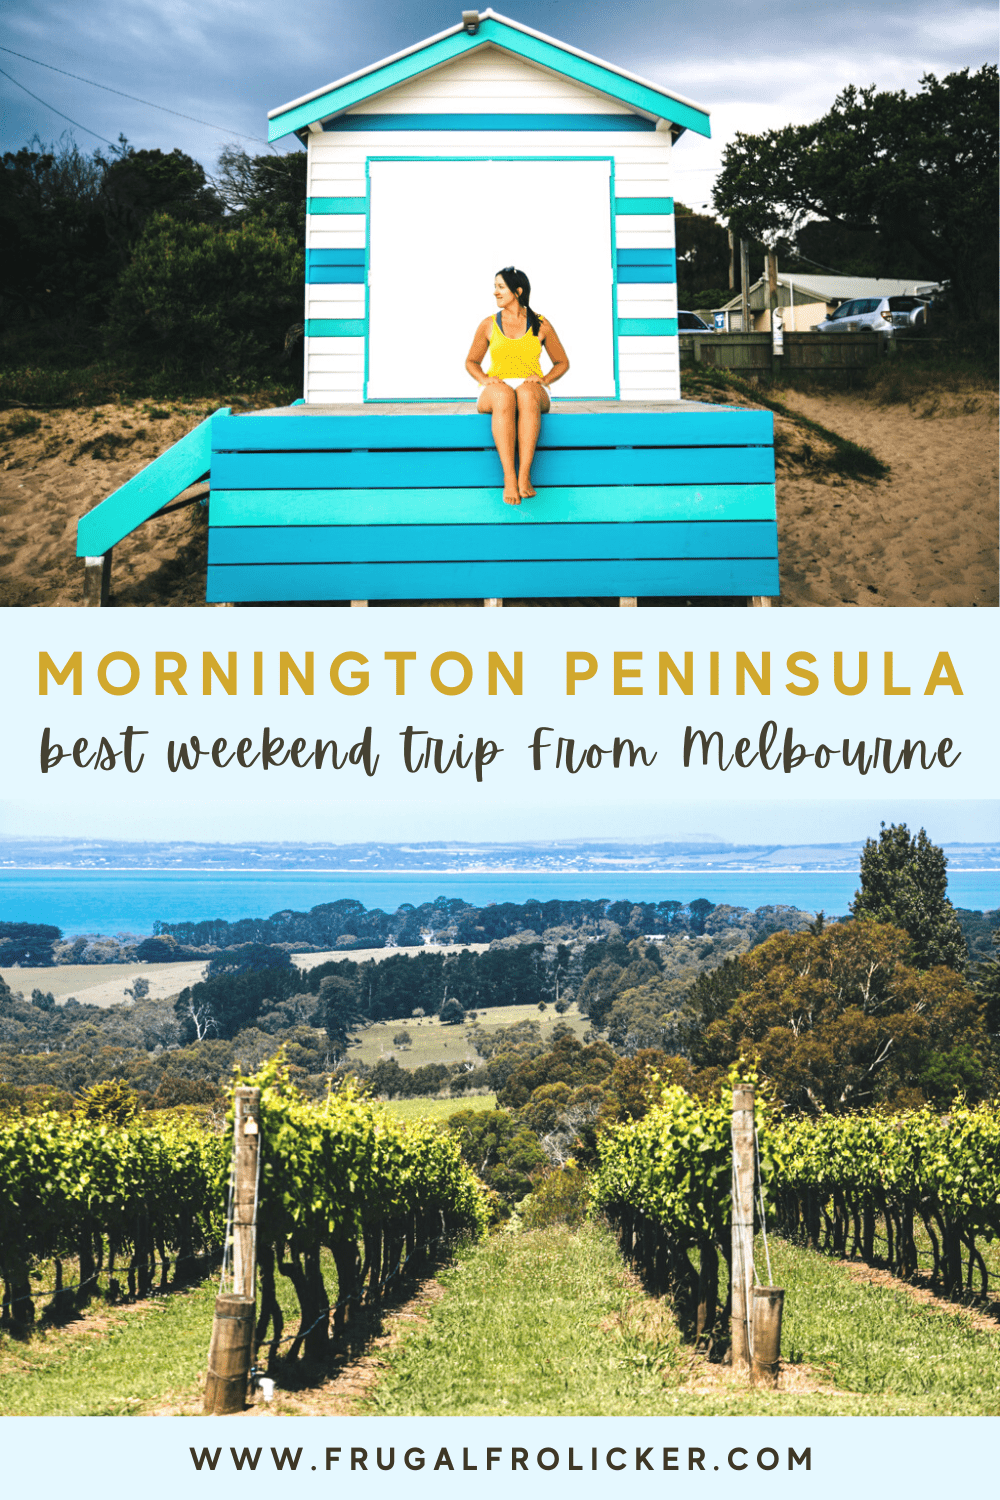 Mornington Peninsula is the best side trip from Melbourne